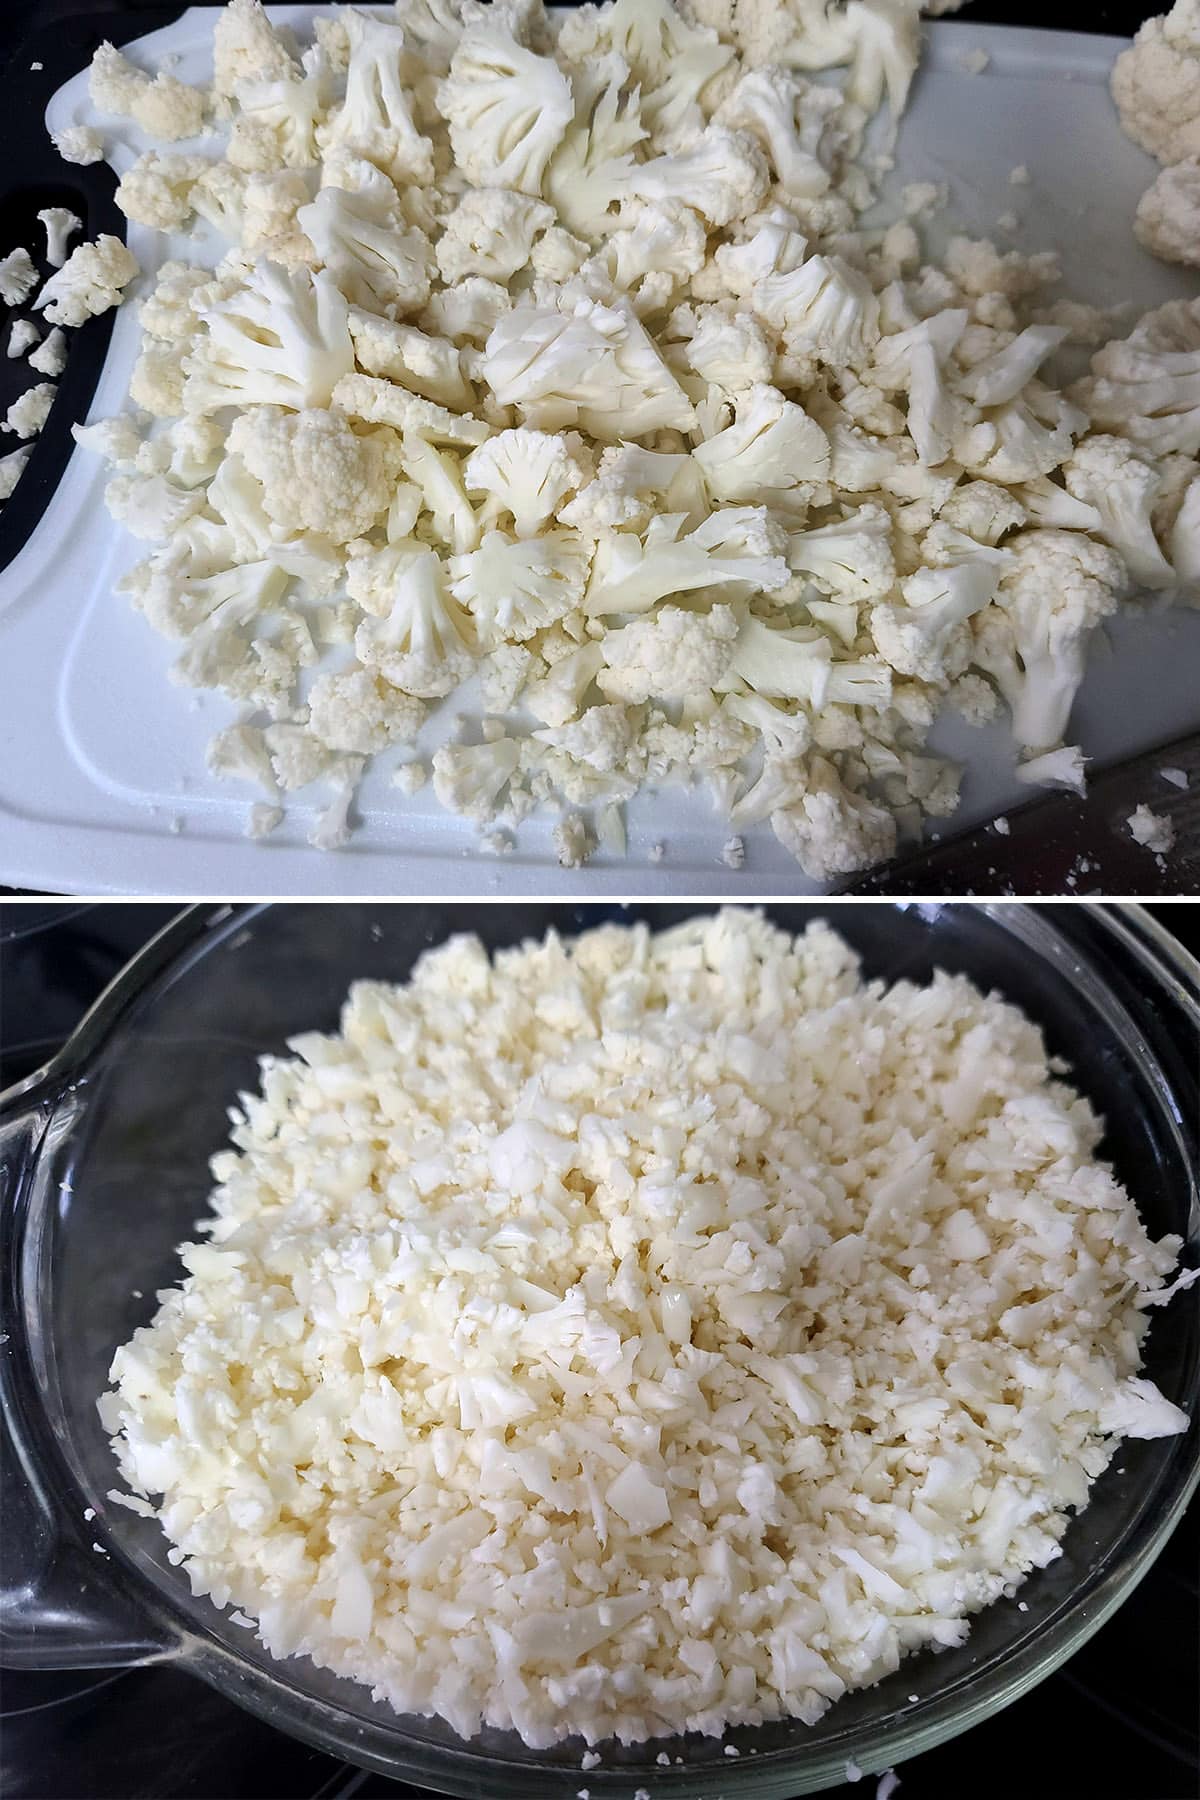 A 2 part image showing a cauliflower being chopped into small florets, then a dish of riced cauliflower.